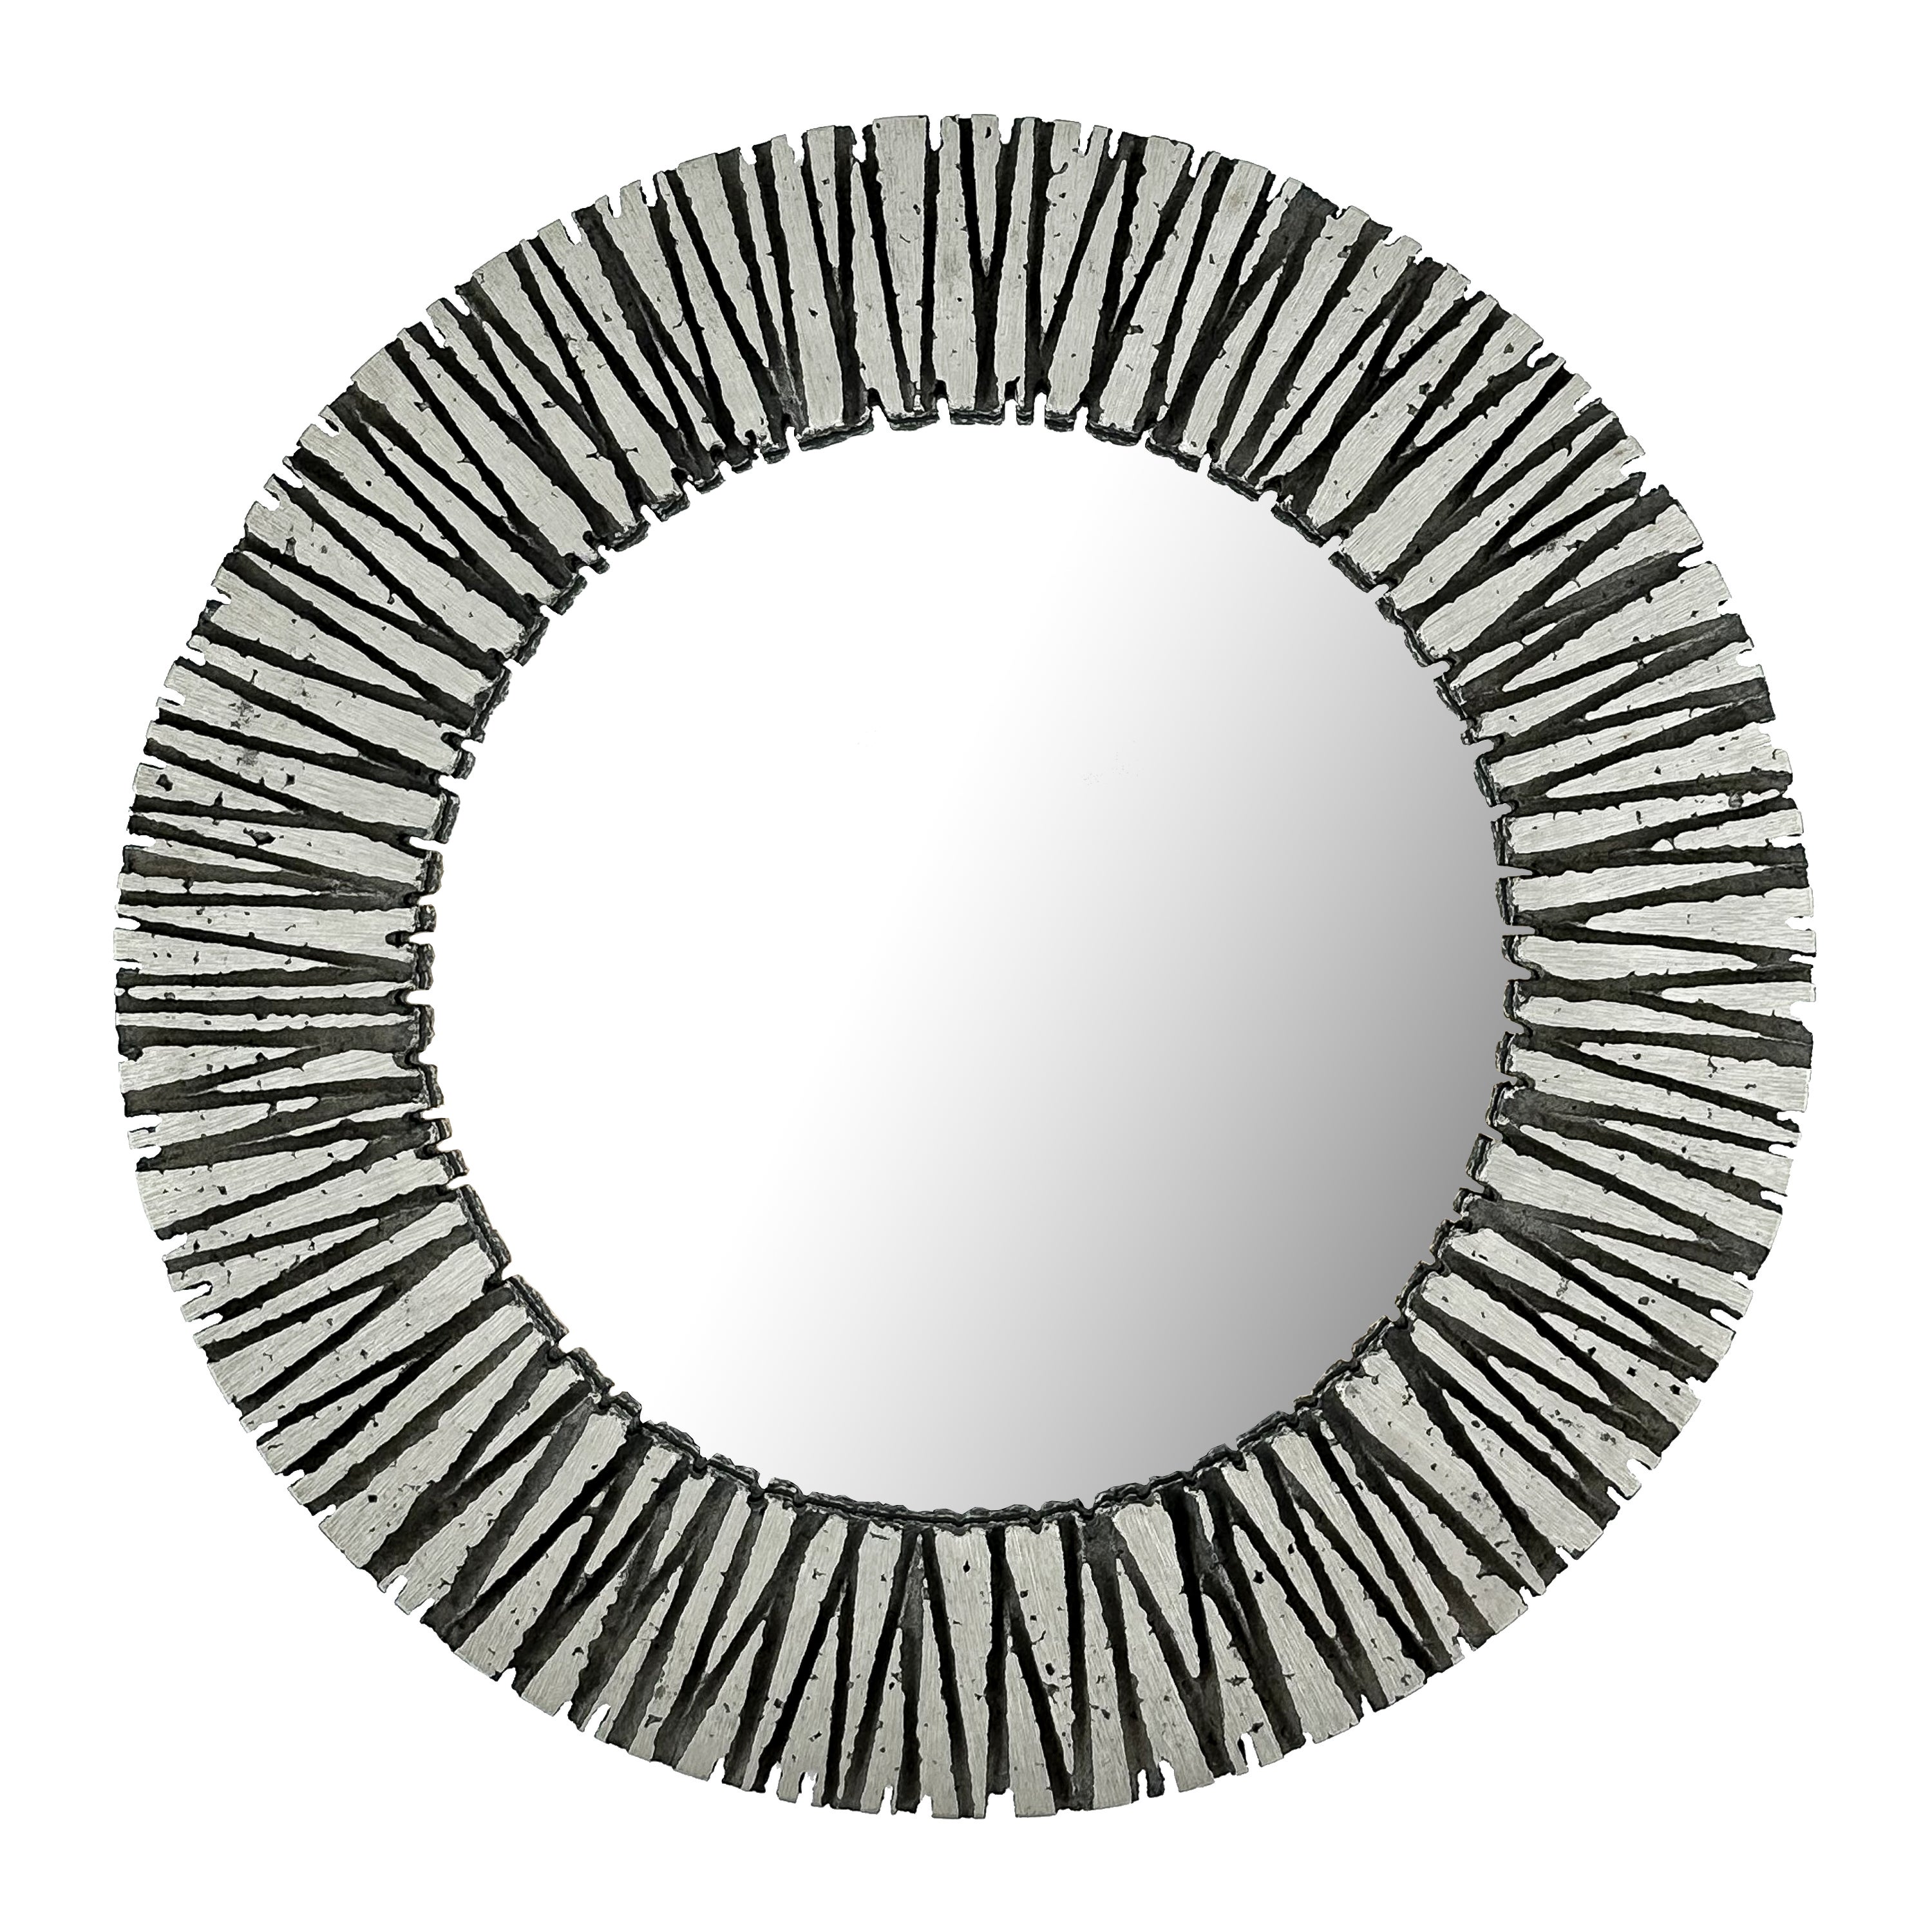 Willy Ceysens Brutalist Aluminum Wall Mirror For Sale